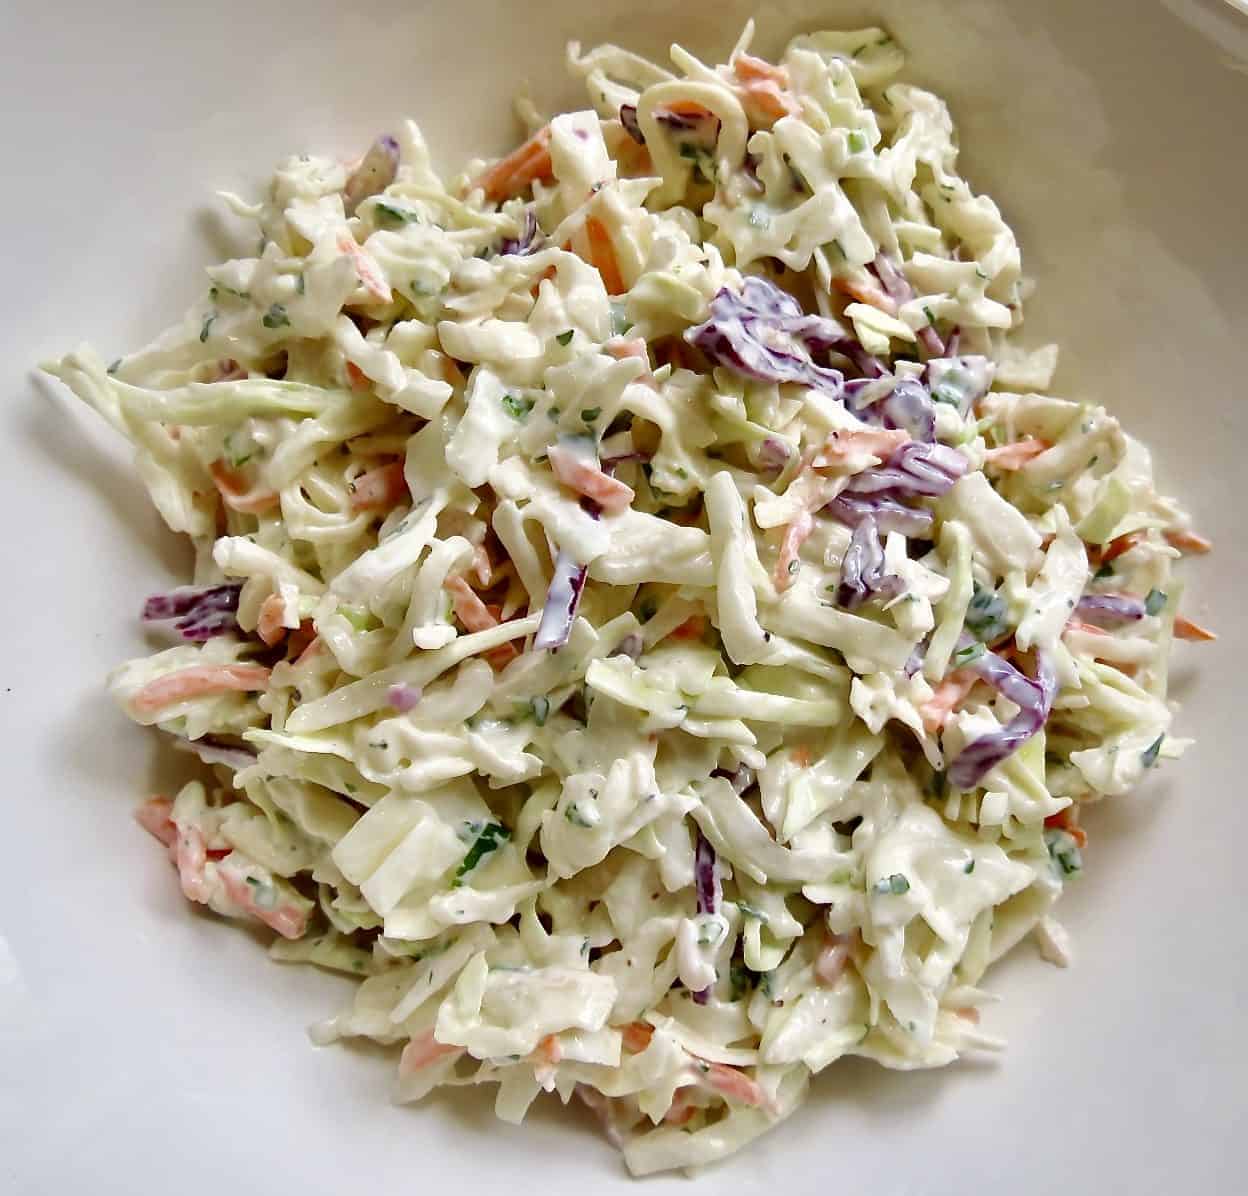 Southern Louisiana Coleslaw in a bowl.